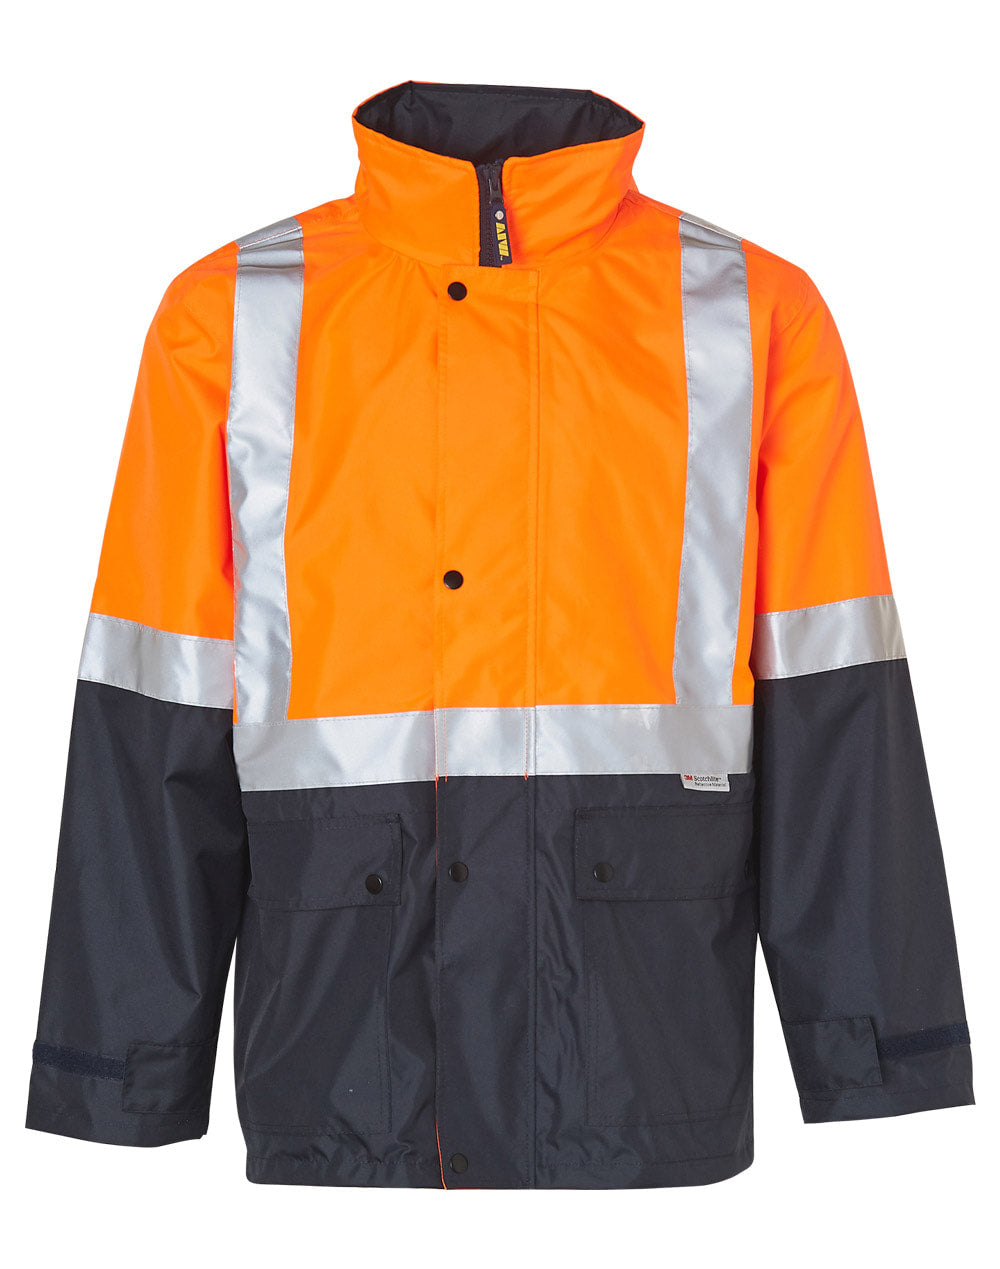 AIW SW18A HI-VIS SAFETY JACKET WITH MESH LINING & 3M TAPES